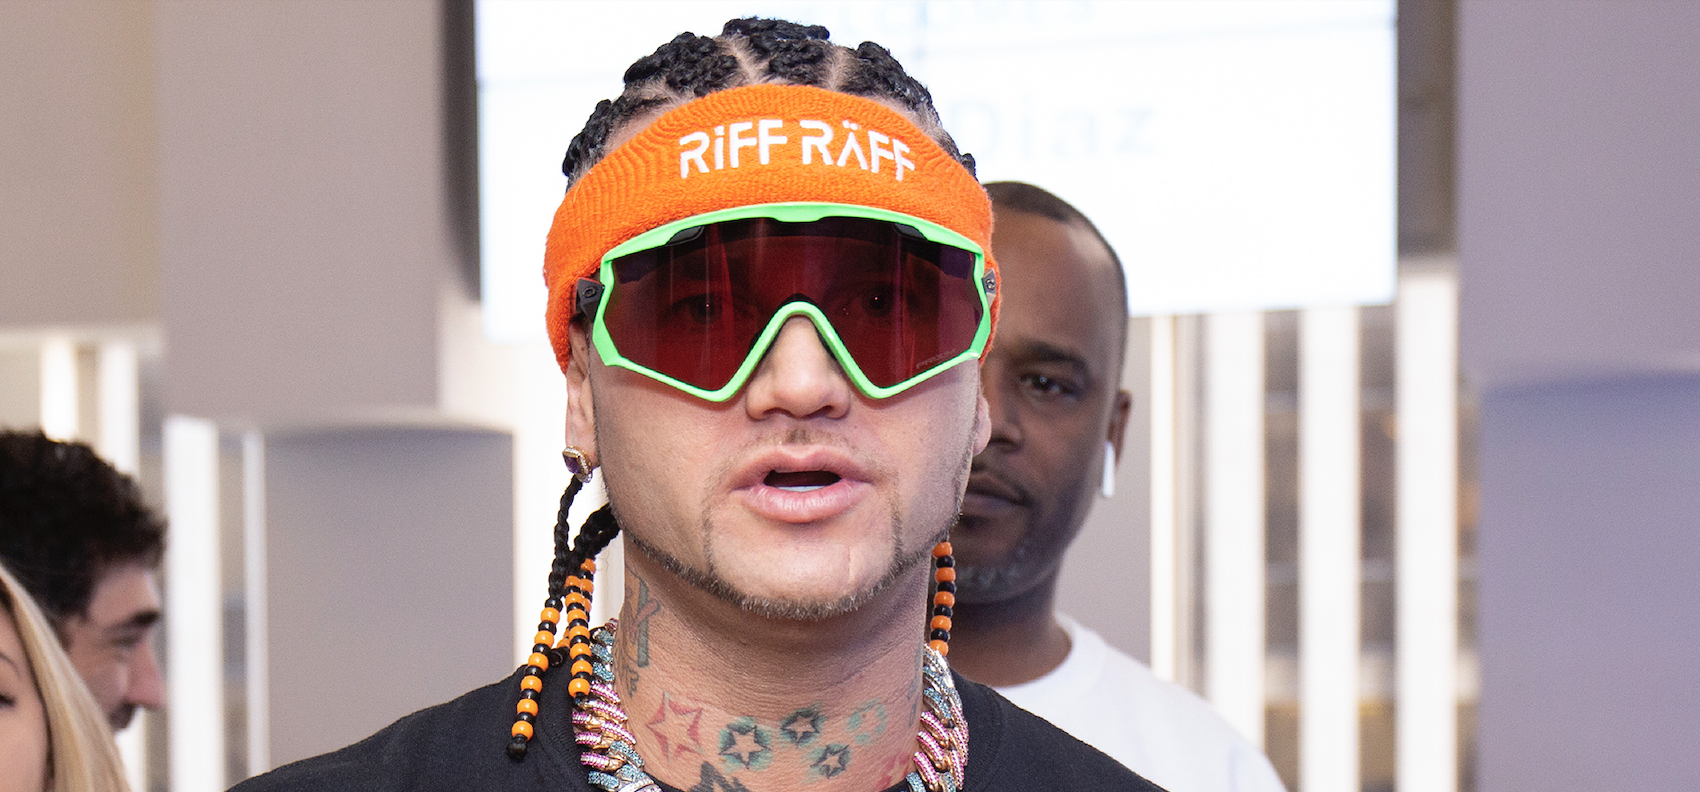 Riff Raff Offers Home Studio Sessions For $15K An Hour